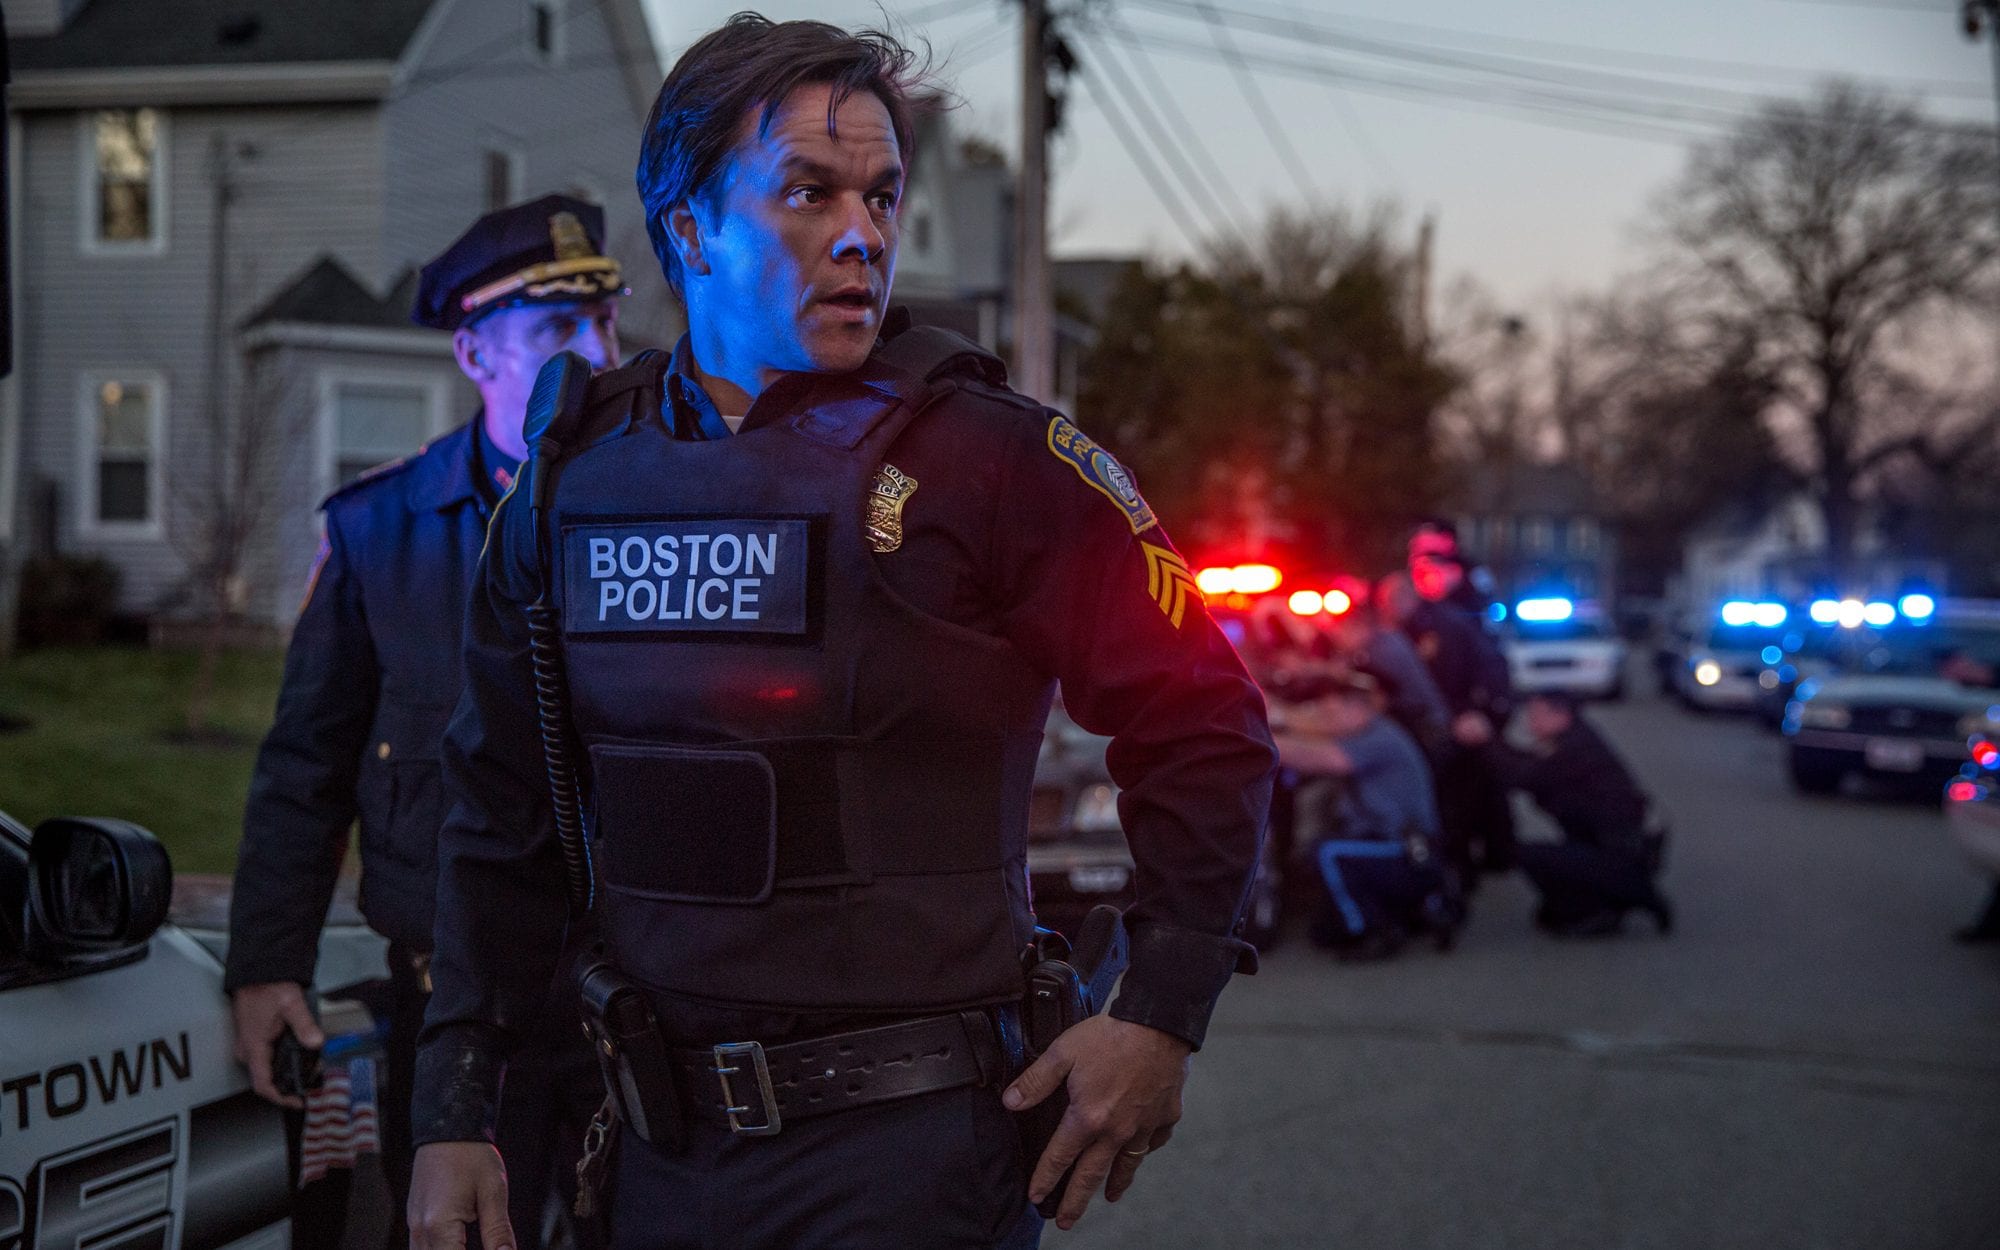 Mark Wahlberg's Patriots Day as a commercial disappointment even though it was critically acclaimed